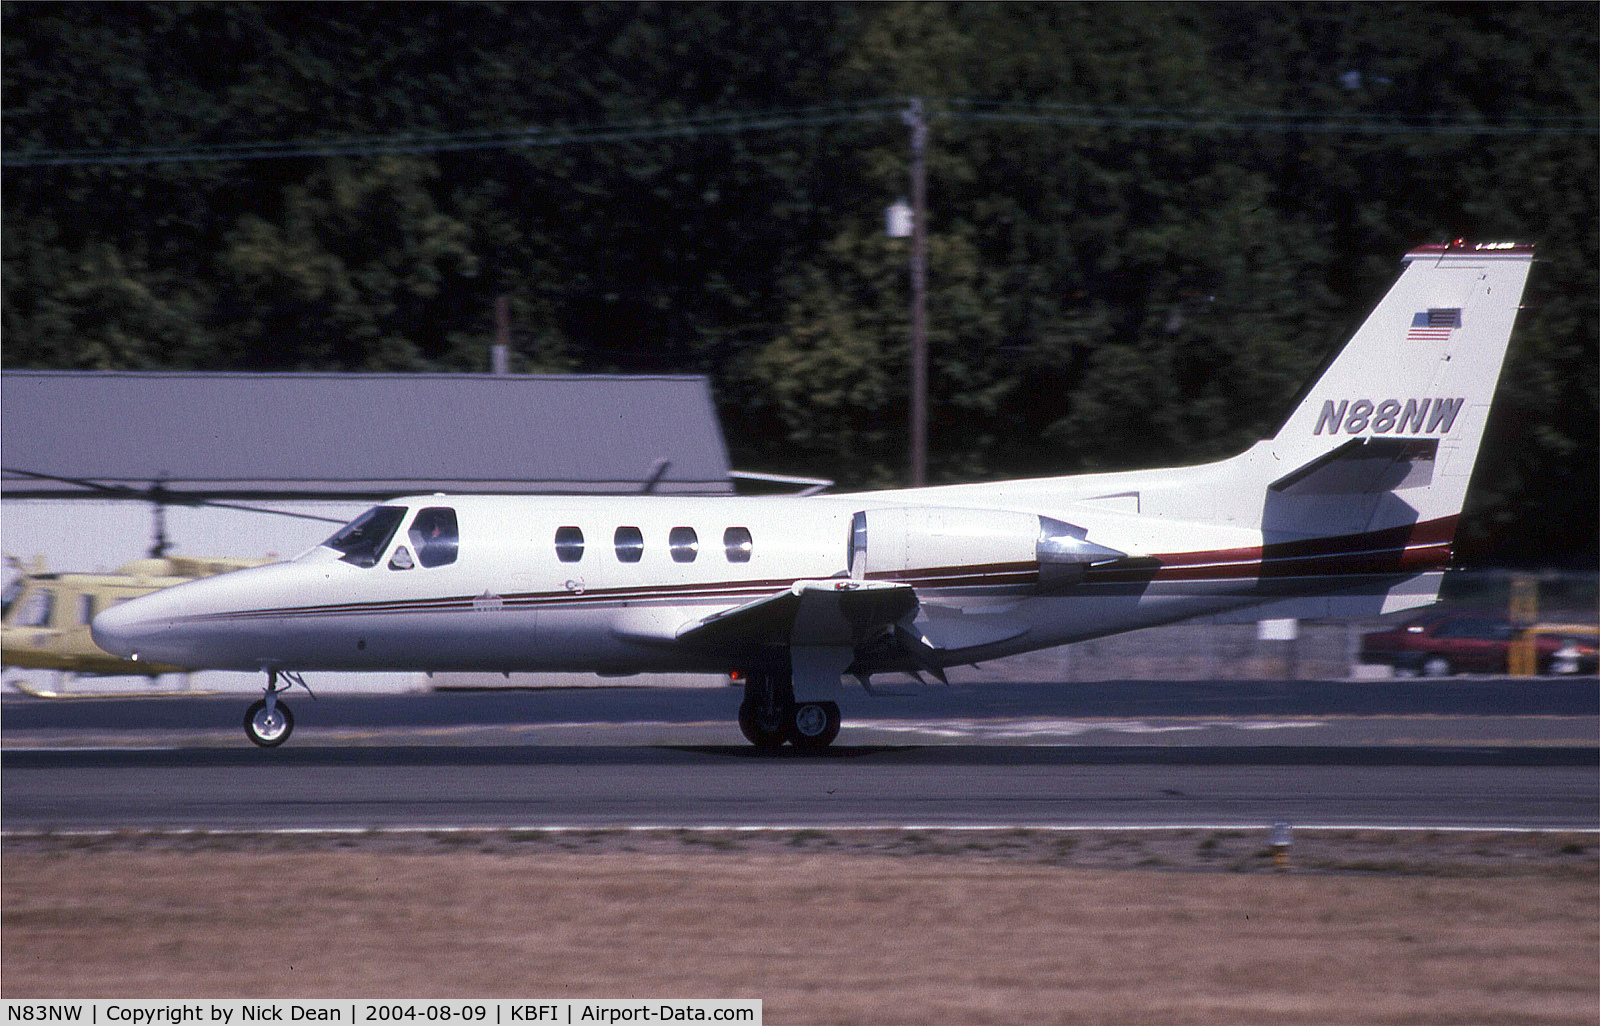 N83NW, 1976 Cessna 500 Citation I C/N 500-0309, KBFI (Seen here as N88NW and currently registered N83NW as posted)